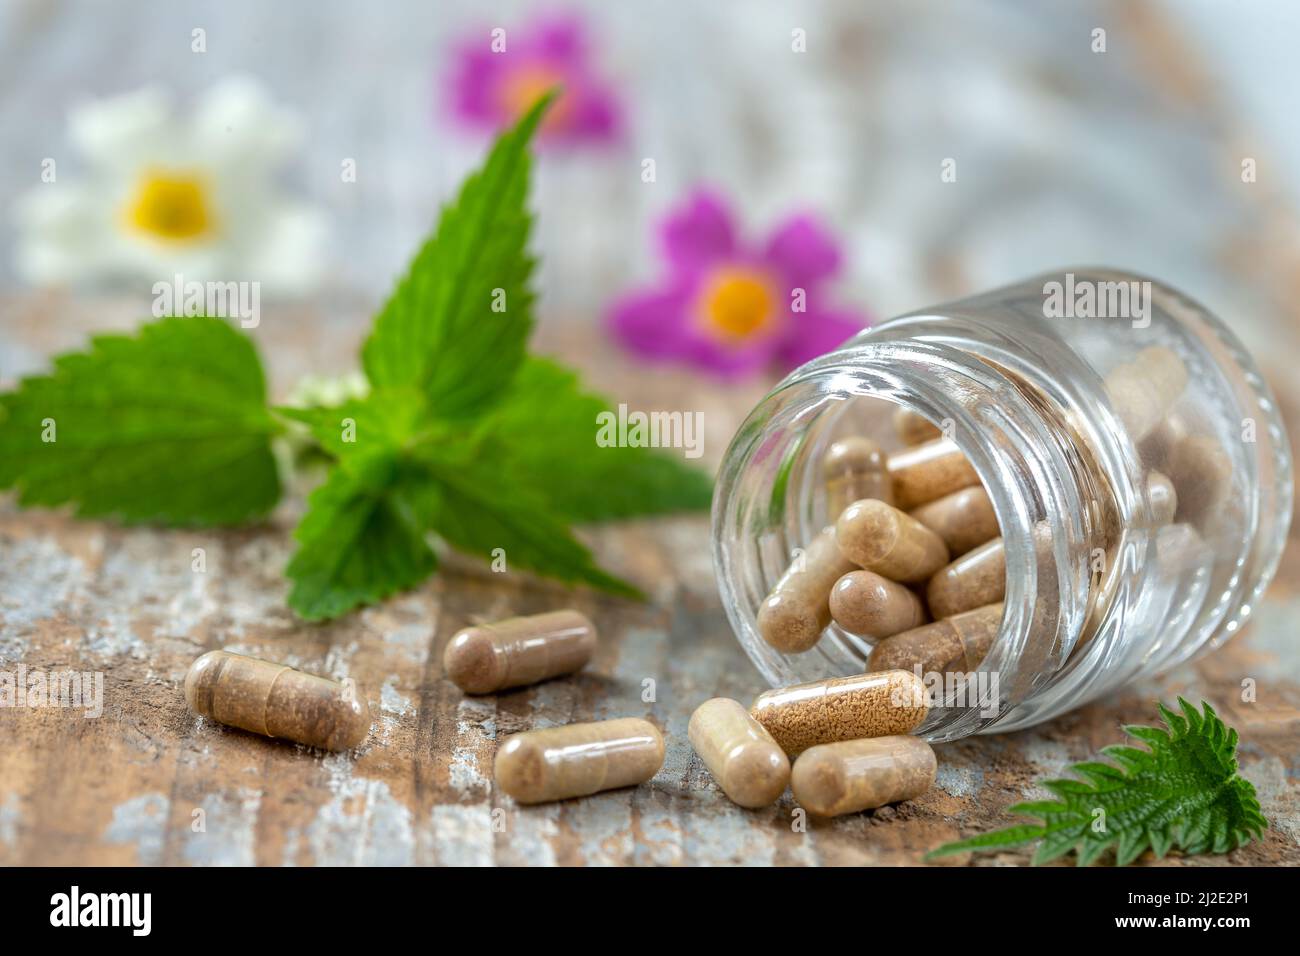 Bottle of pills food suplements healthy medicine medication health care treatment additives pharmacy with medicinal fresh plants and flowerson background Stock Photo